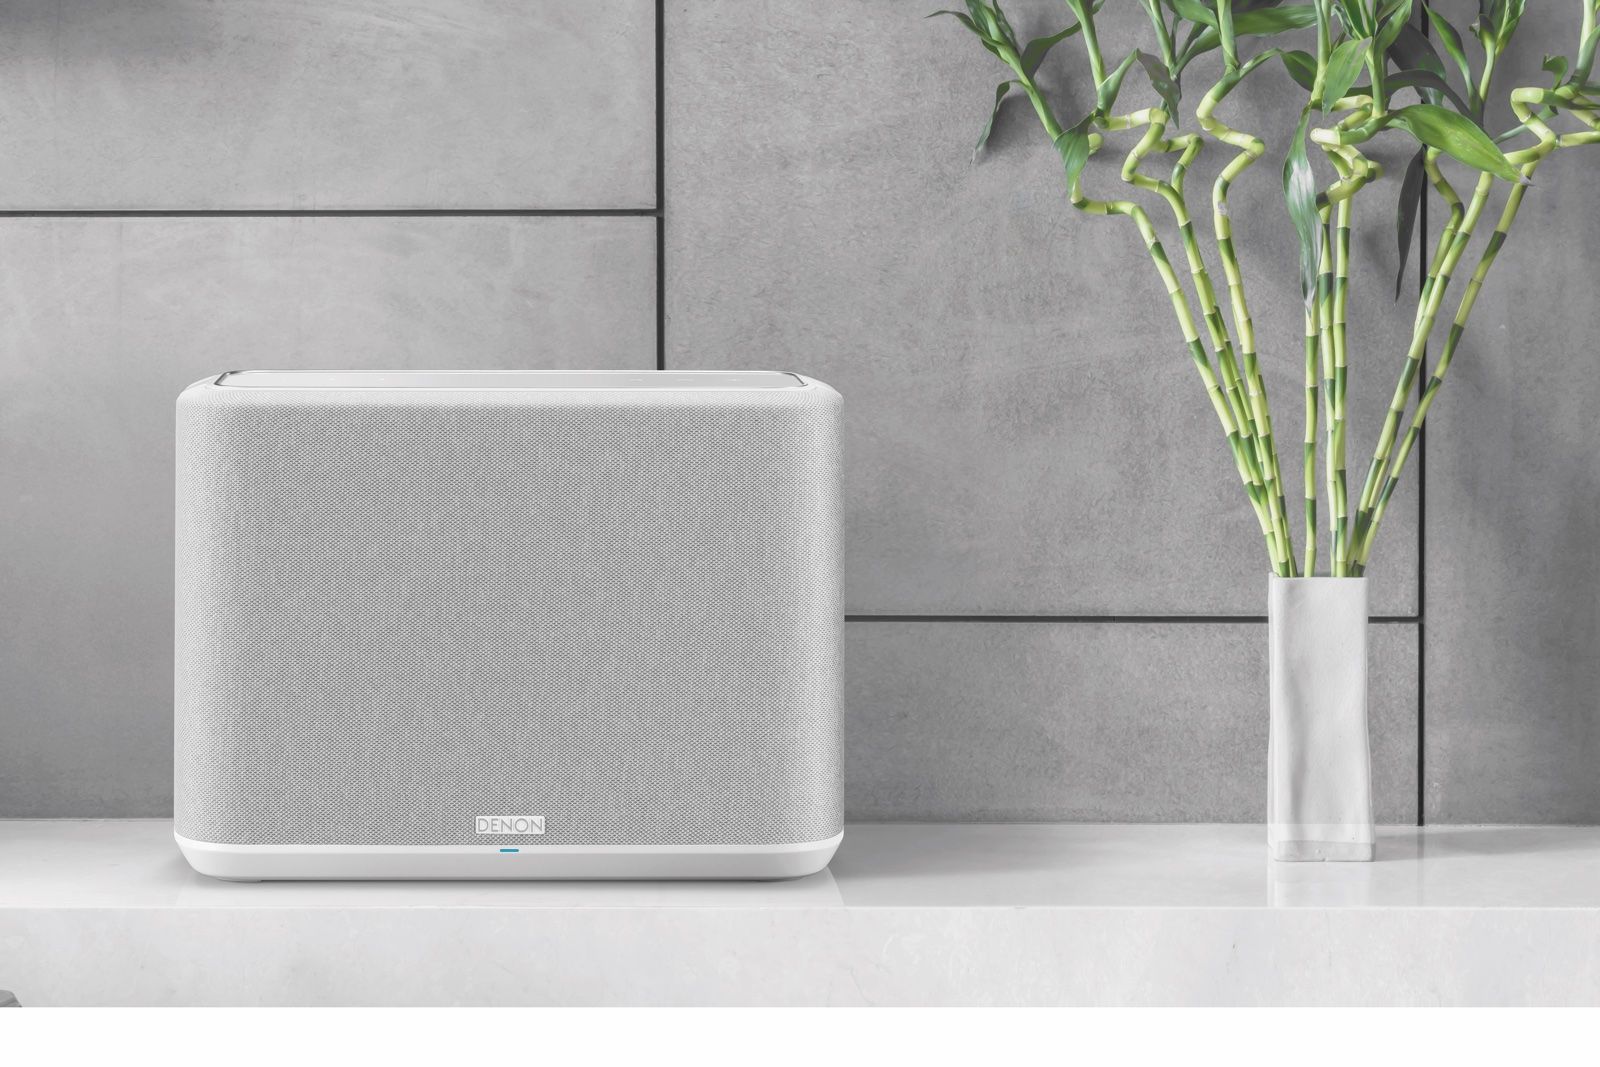 Denon Home is a range of multi-room speakers to challenge Sonos image 2